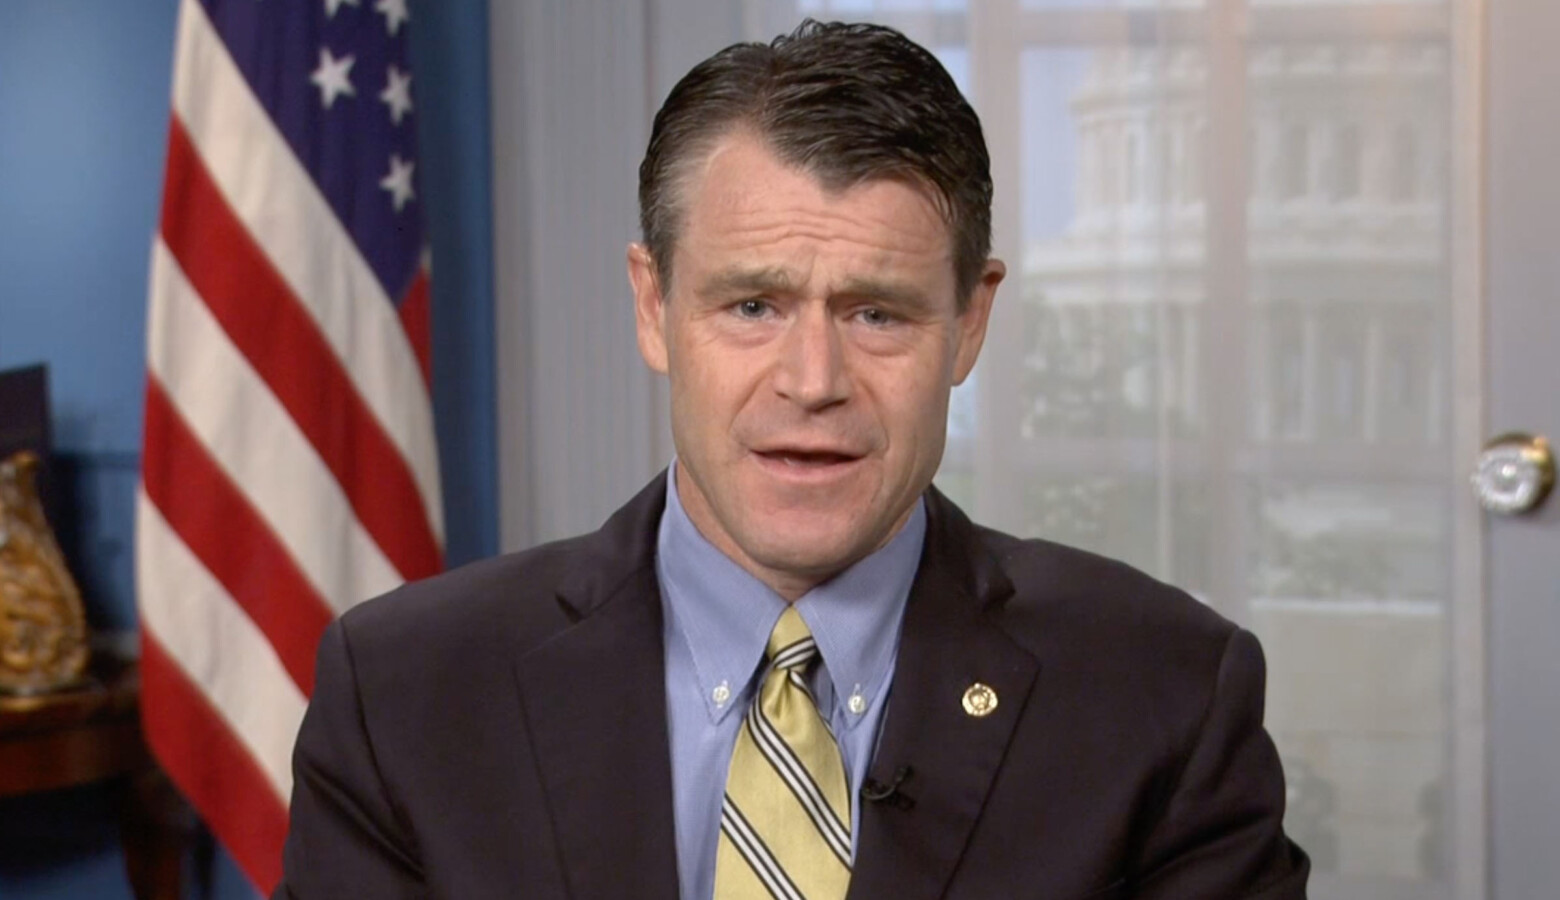 Sen. Todd Young (R-Ind.) said he wants the federal government’s next round of COVID-19 relief to be “targeted” at those who need help most. (Screenshot)